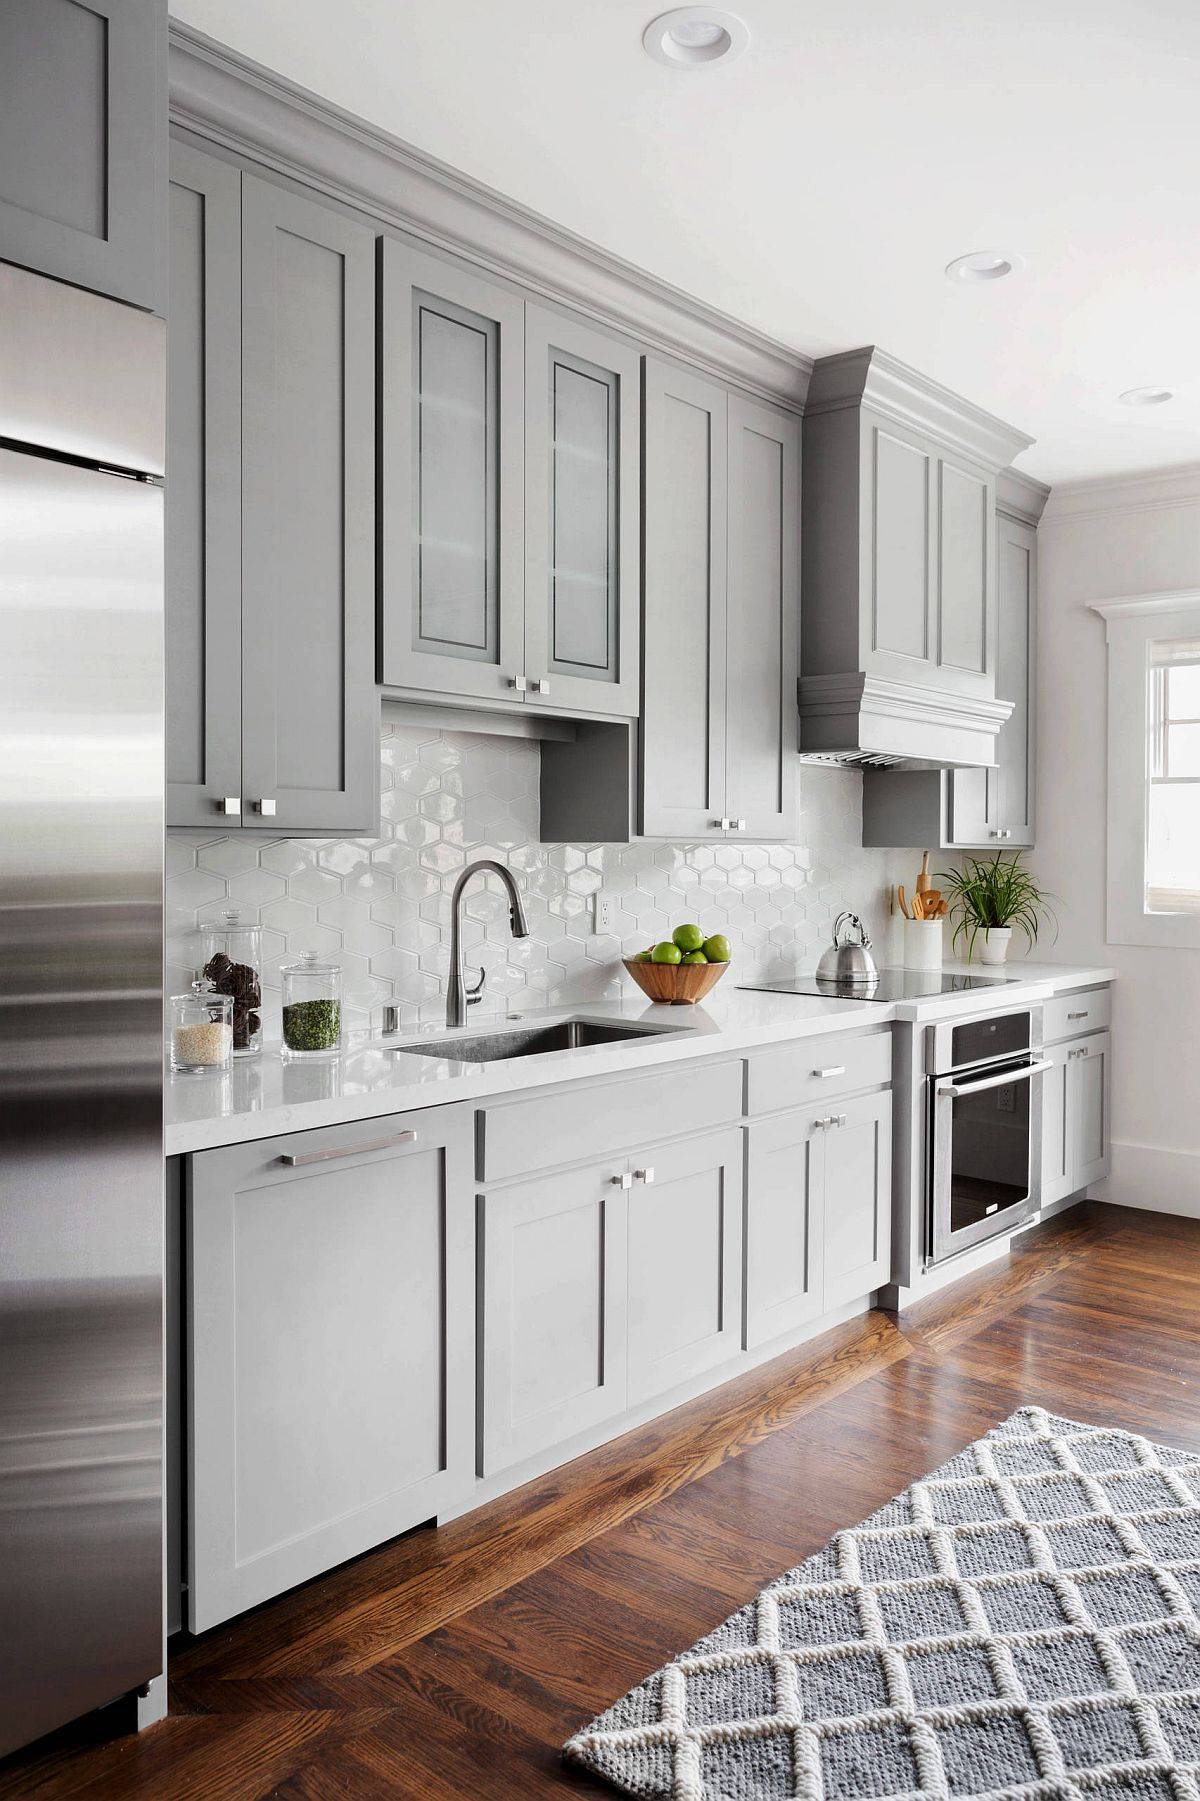 Monochromatic-single-wall-kitchen-offers-ample-storage-while-seemingly-blending-into-the-backdrop-69426